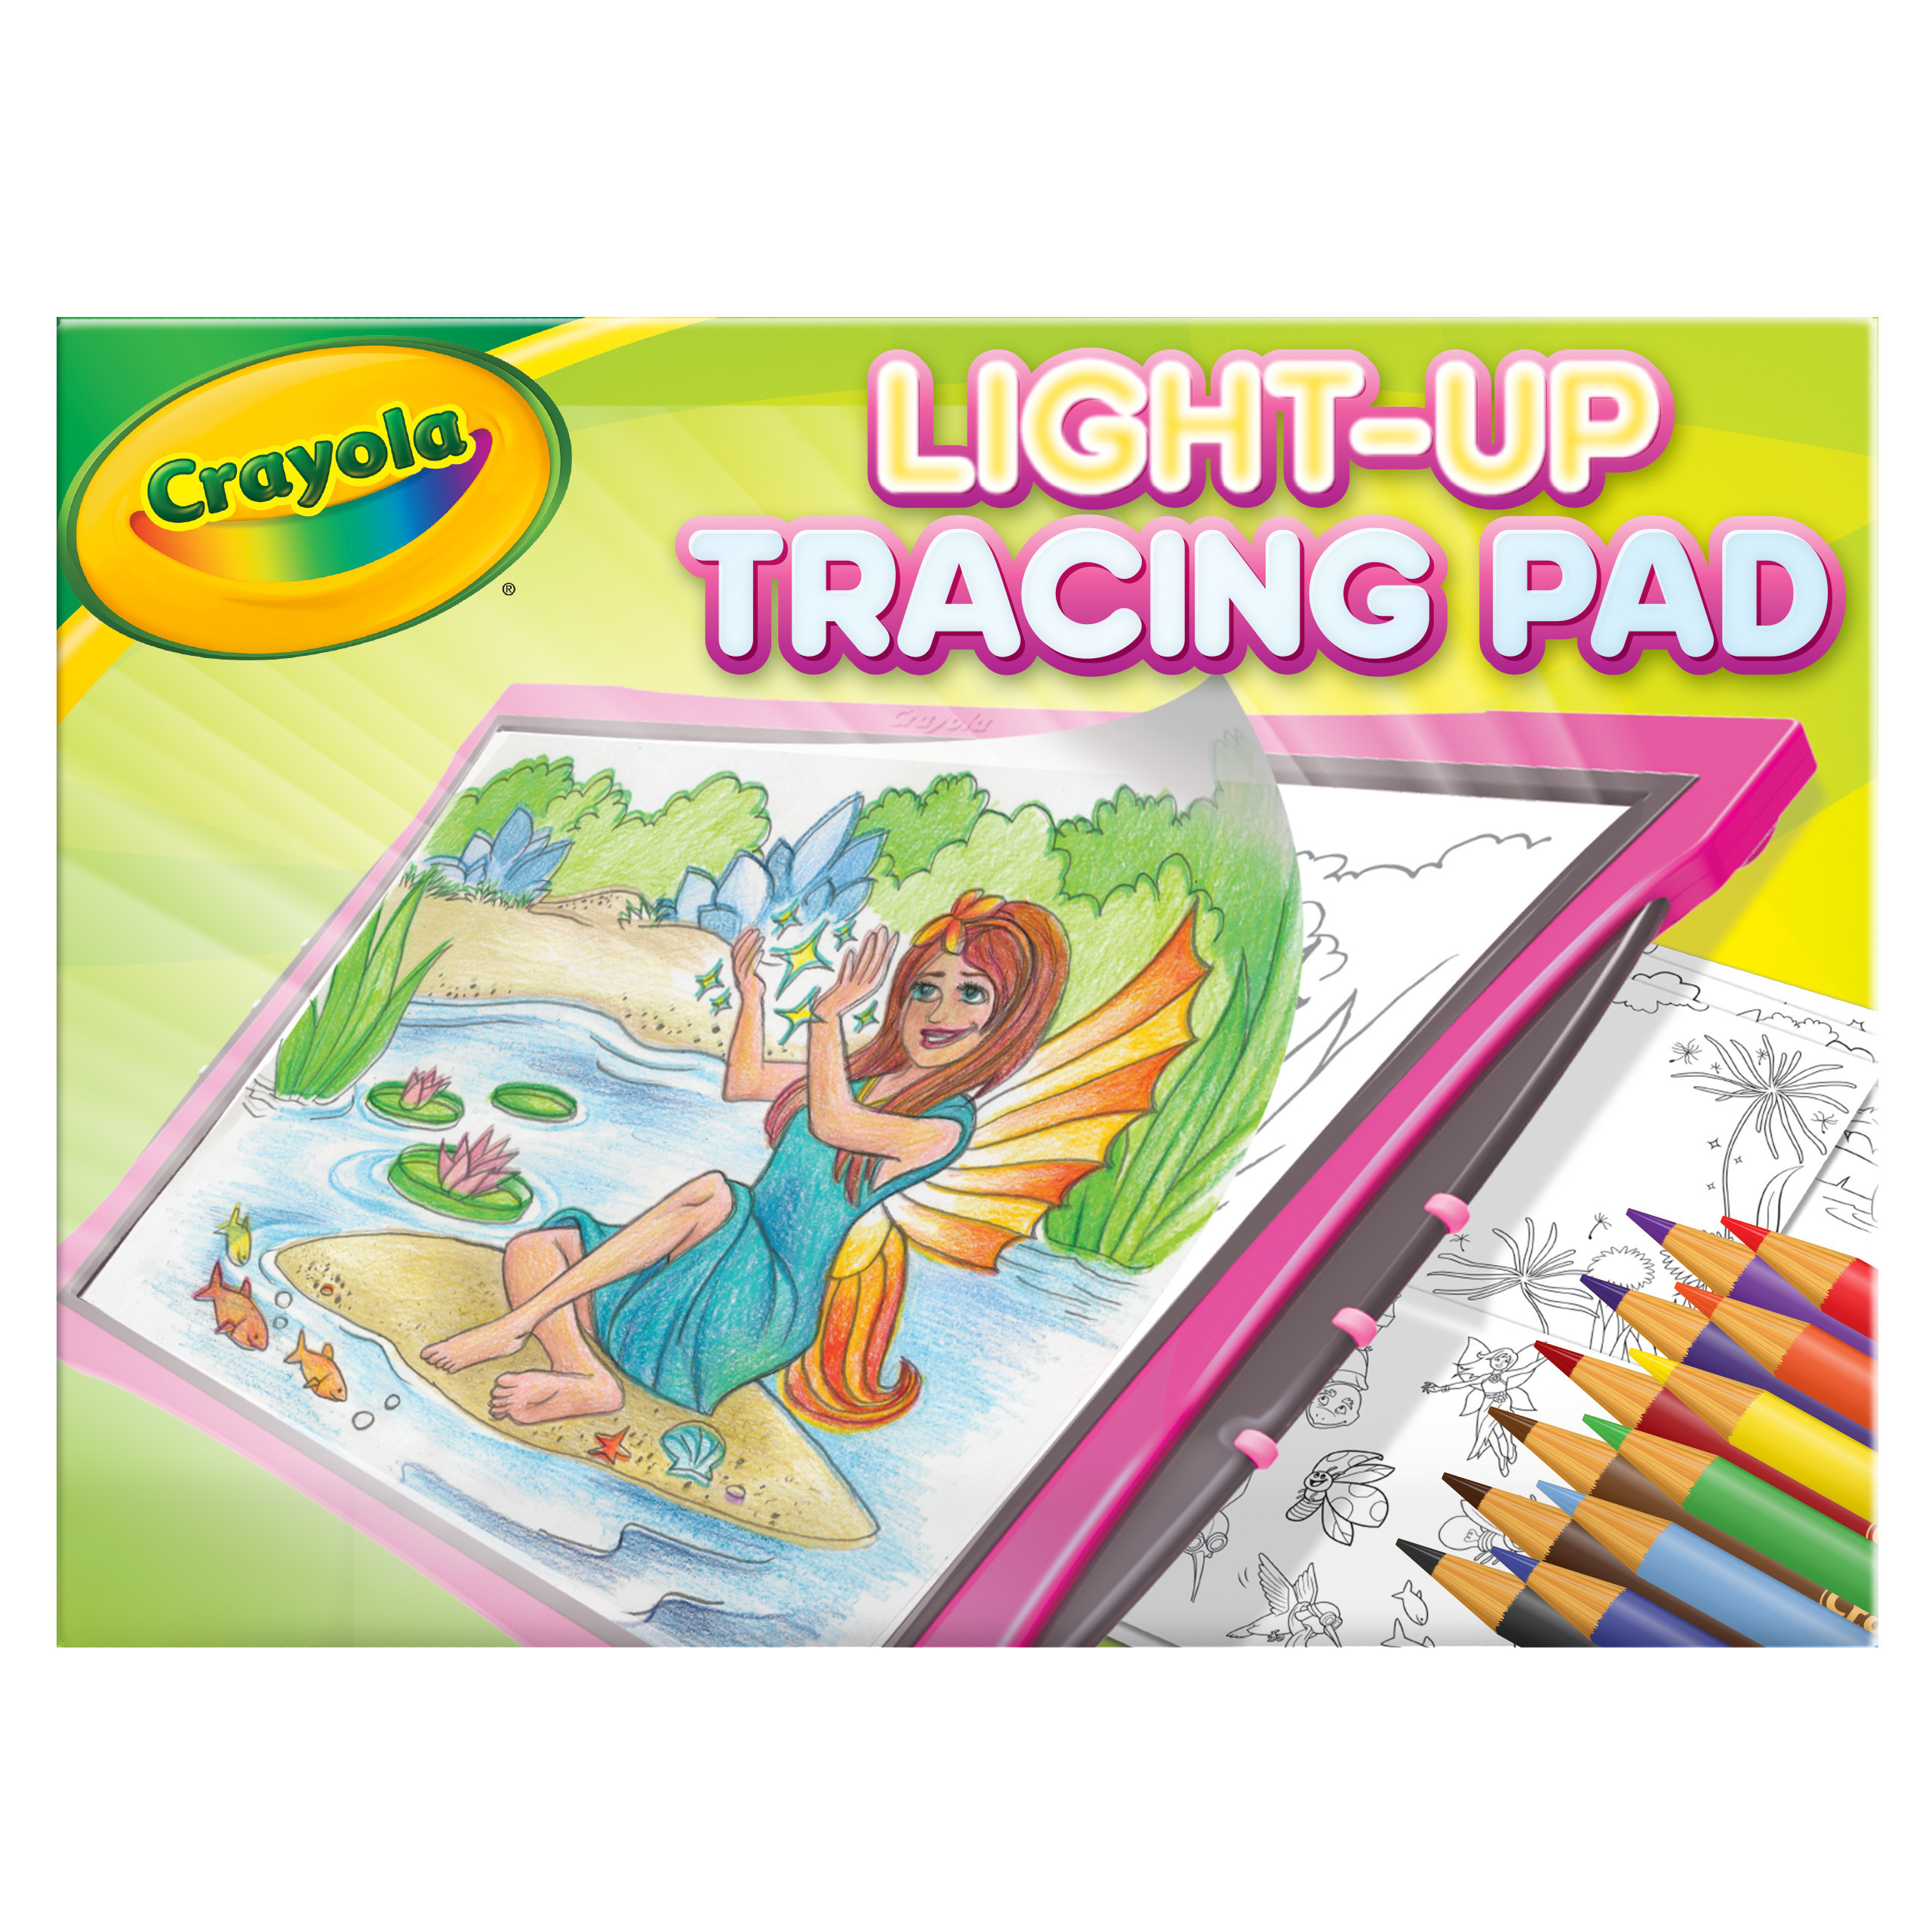 Crayola Light Up Tracing Pad, Pink, Toys, Gifts for Girls & Boys, Child - image 1 of 8